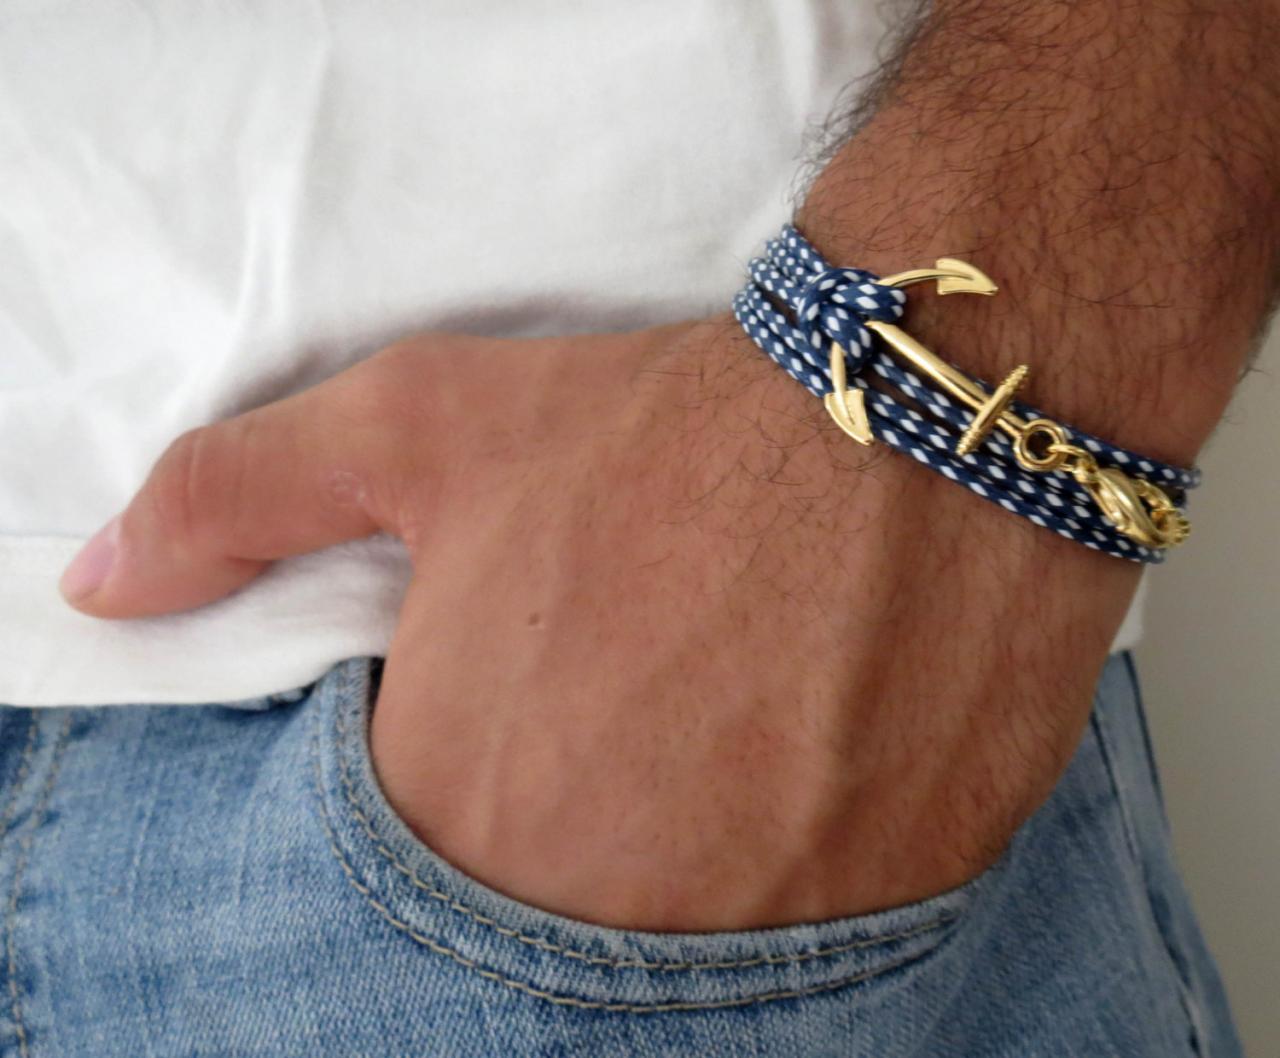 Men's Bracelet - Blue And White Fabric Bracelet With Gold Plated Anchor - Men's Jewelry - Nautical Jewelry - Anchor Jewelry